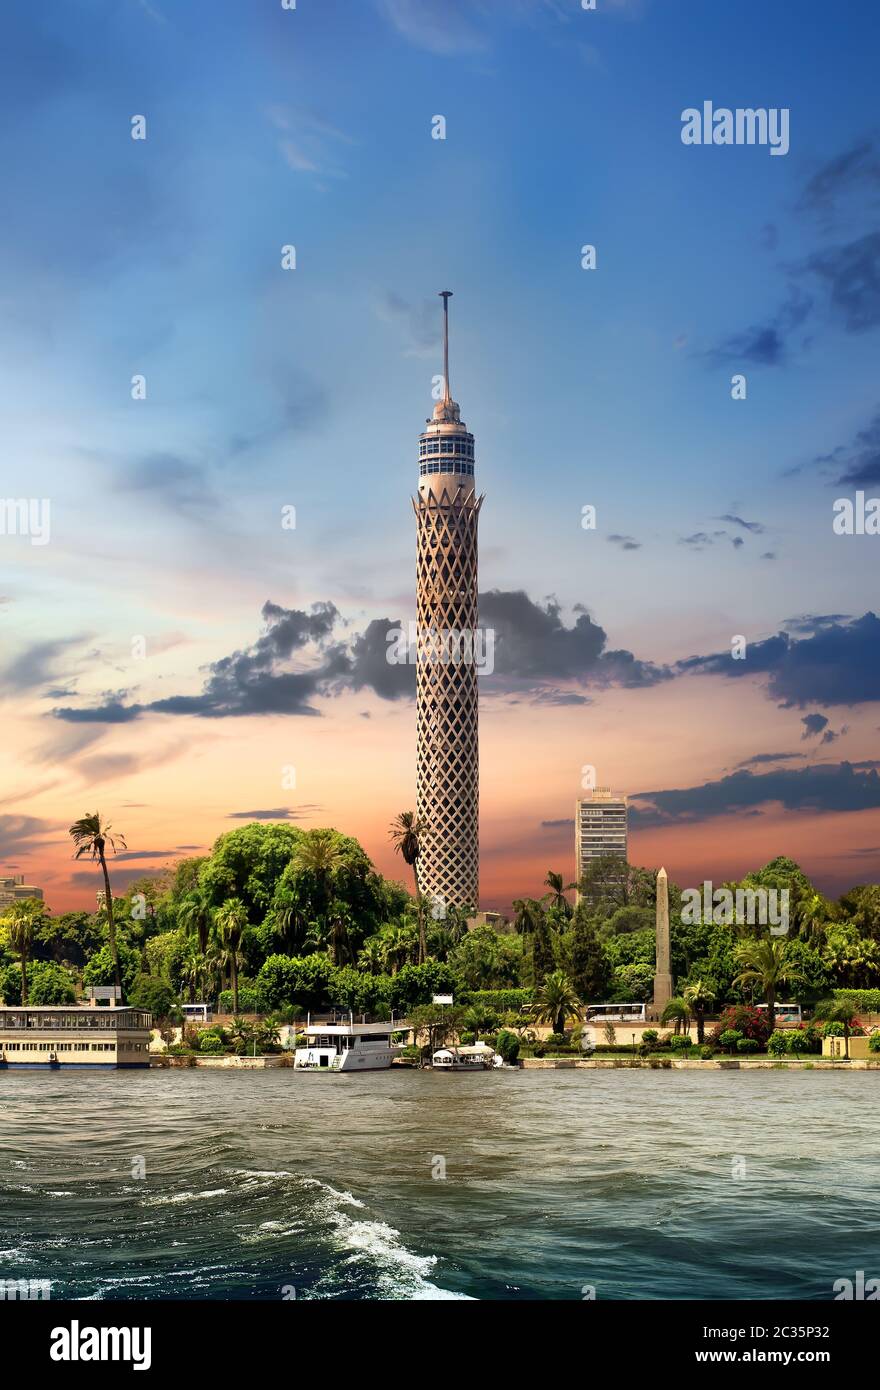 Tower in Cairo Stock Photo